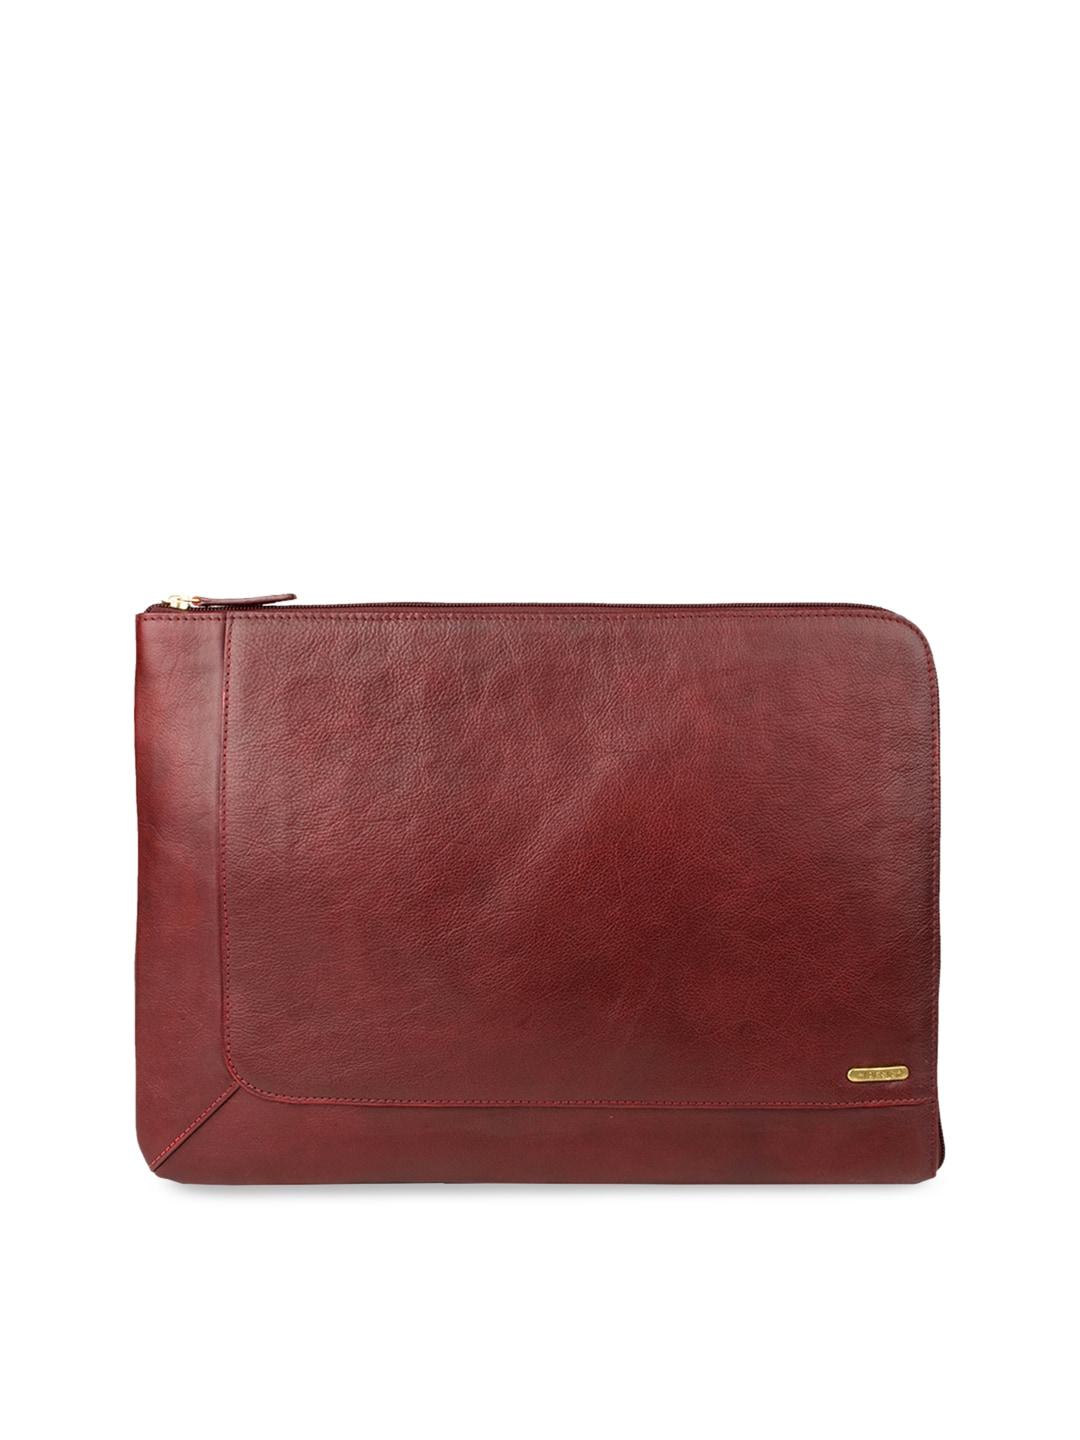 hidesign men red solid leather laptop sleeve